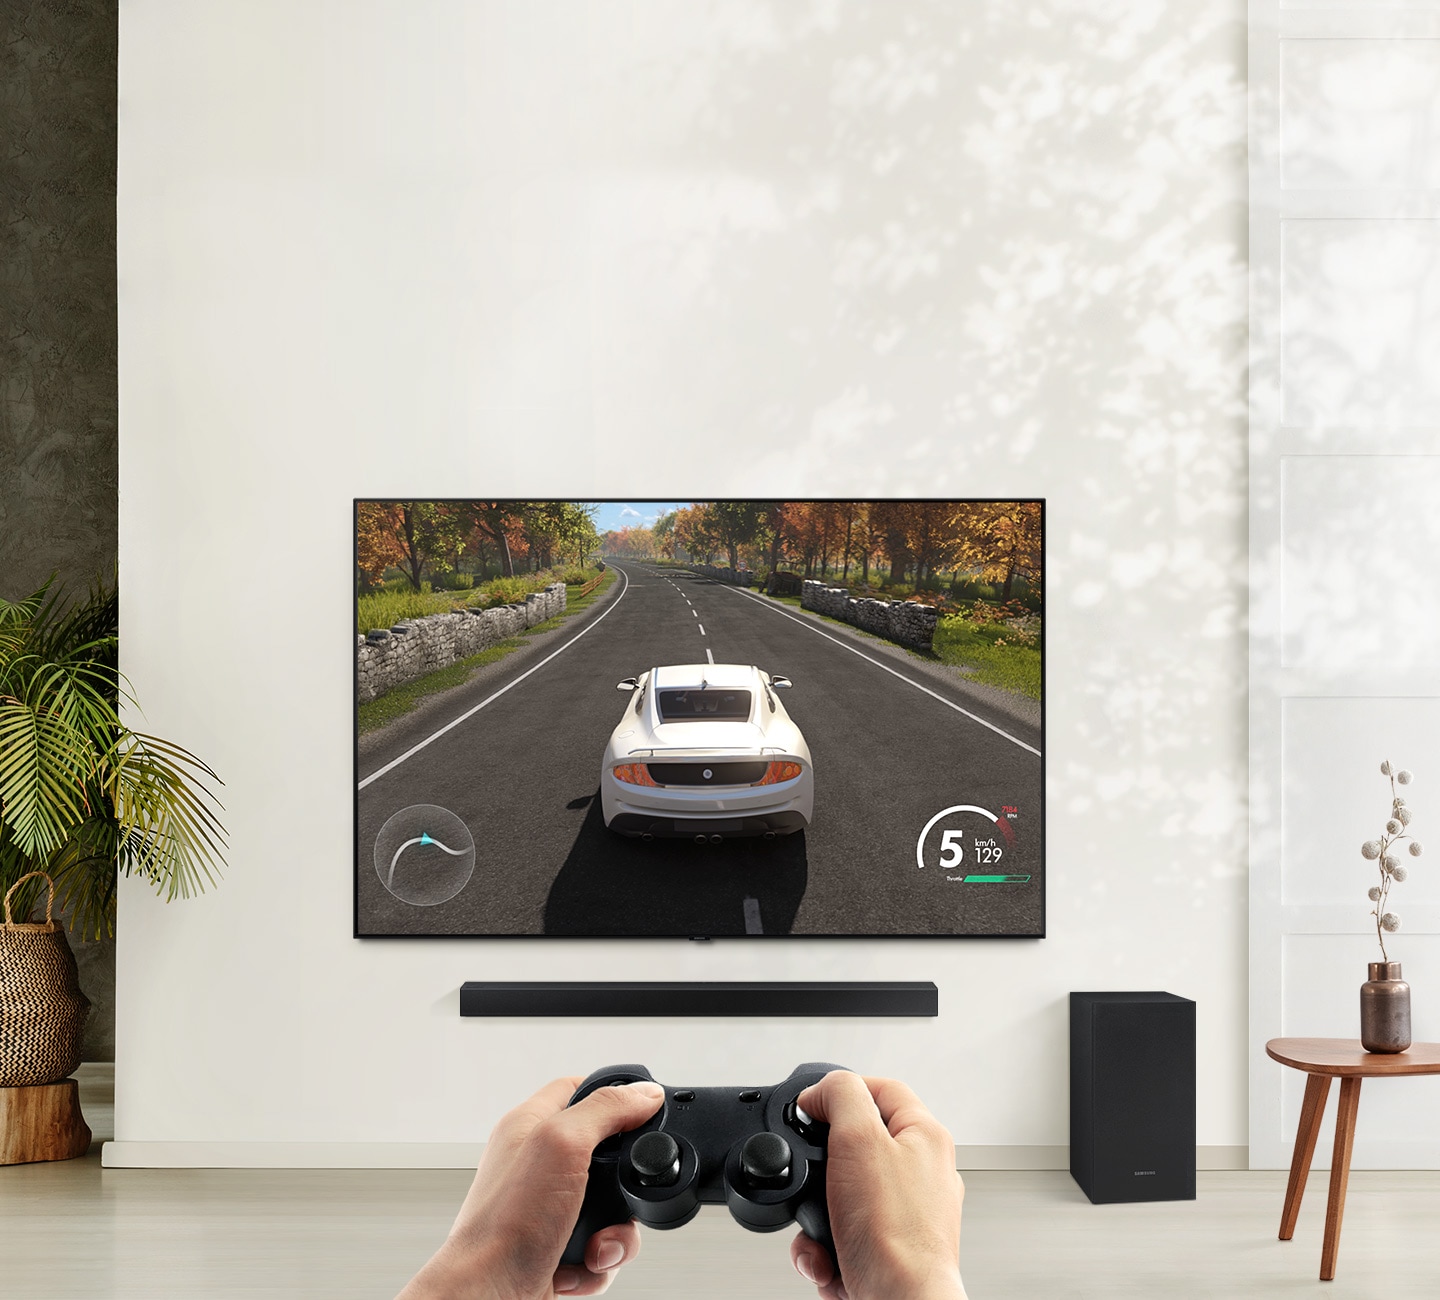 A TV hangs on a wall with a car racing game on screen. An A450 Soundbar hangs below with it's matching subwoofer on the floor nearby.